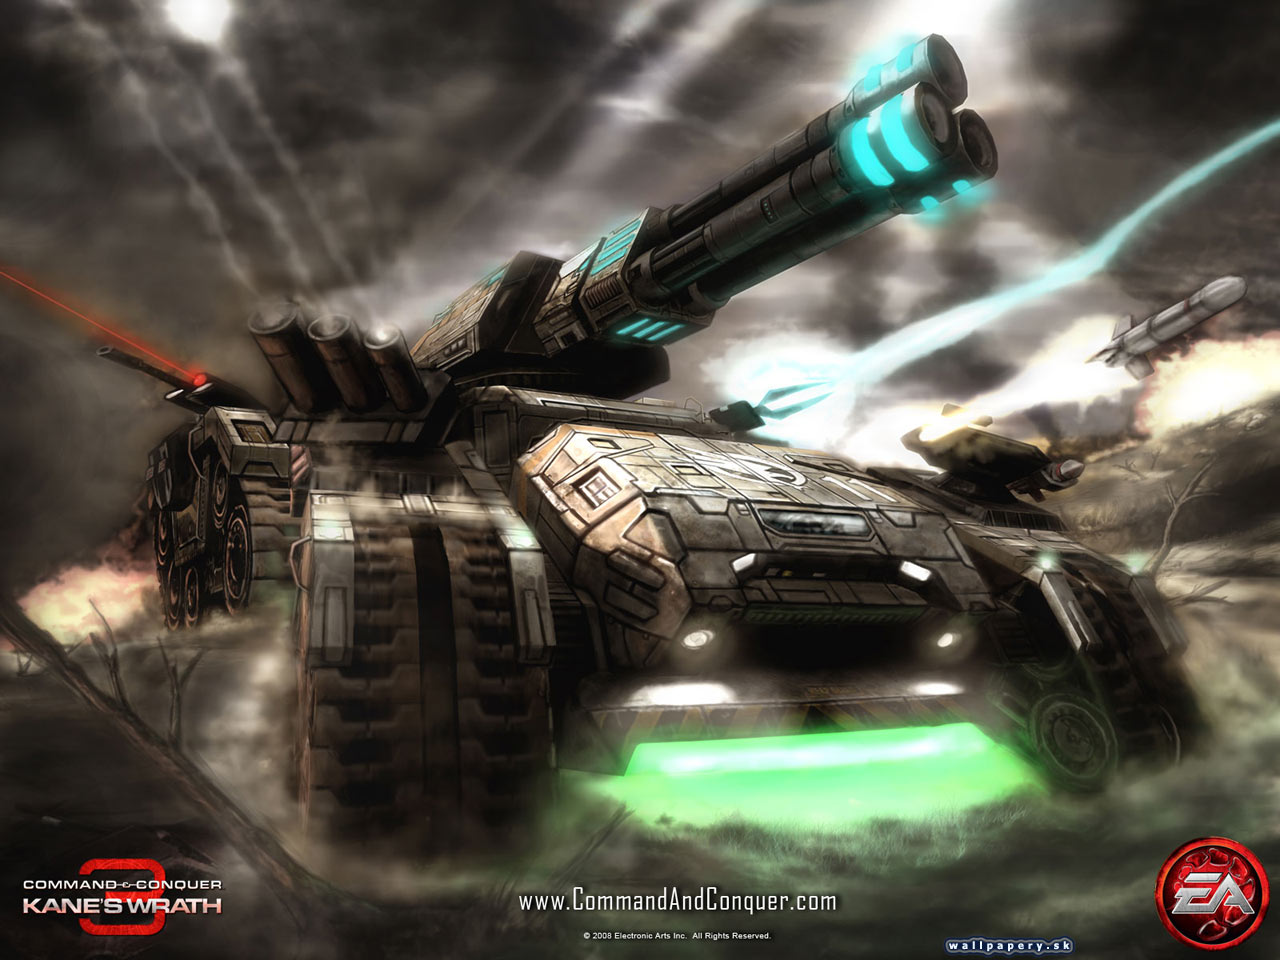 Command & Conquer 3: Kane's Wrath - wallpaper 9